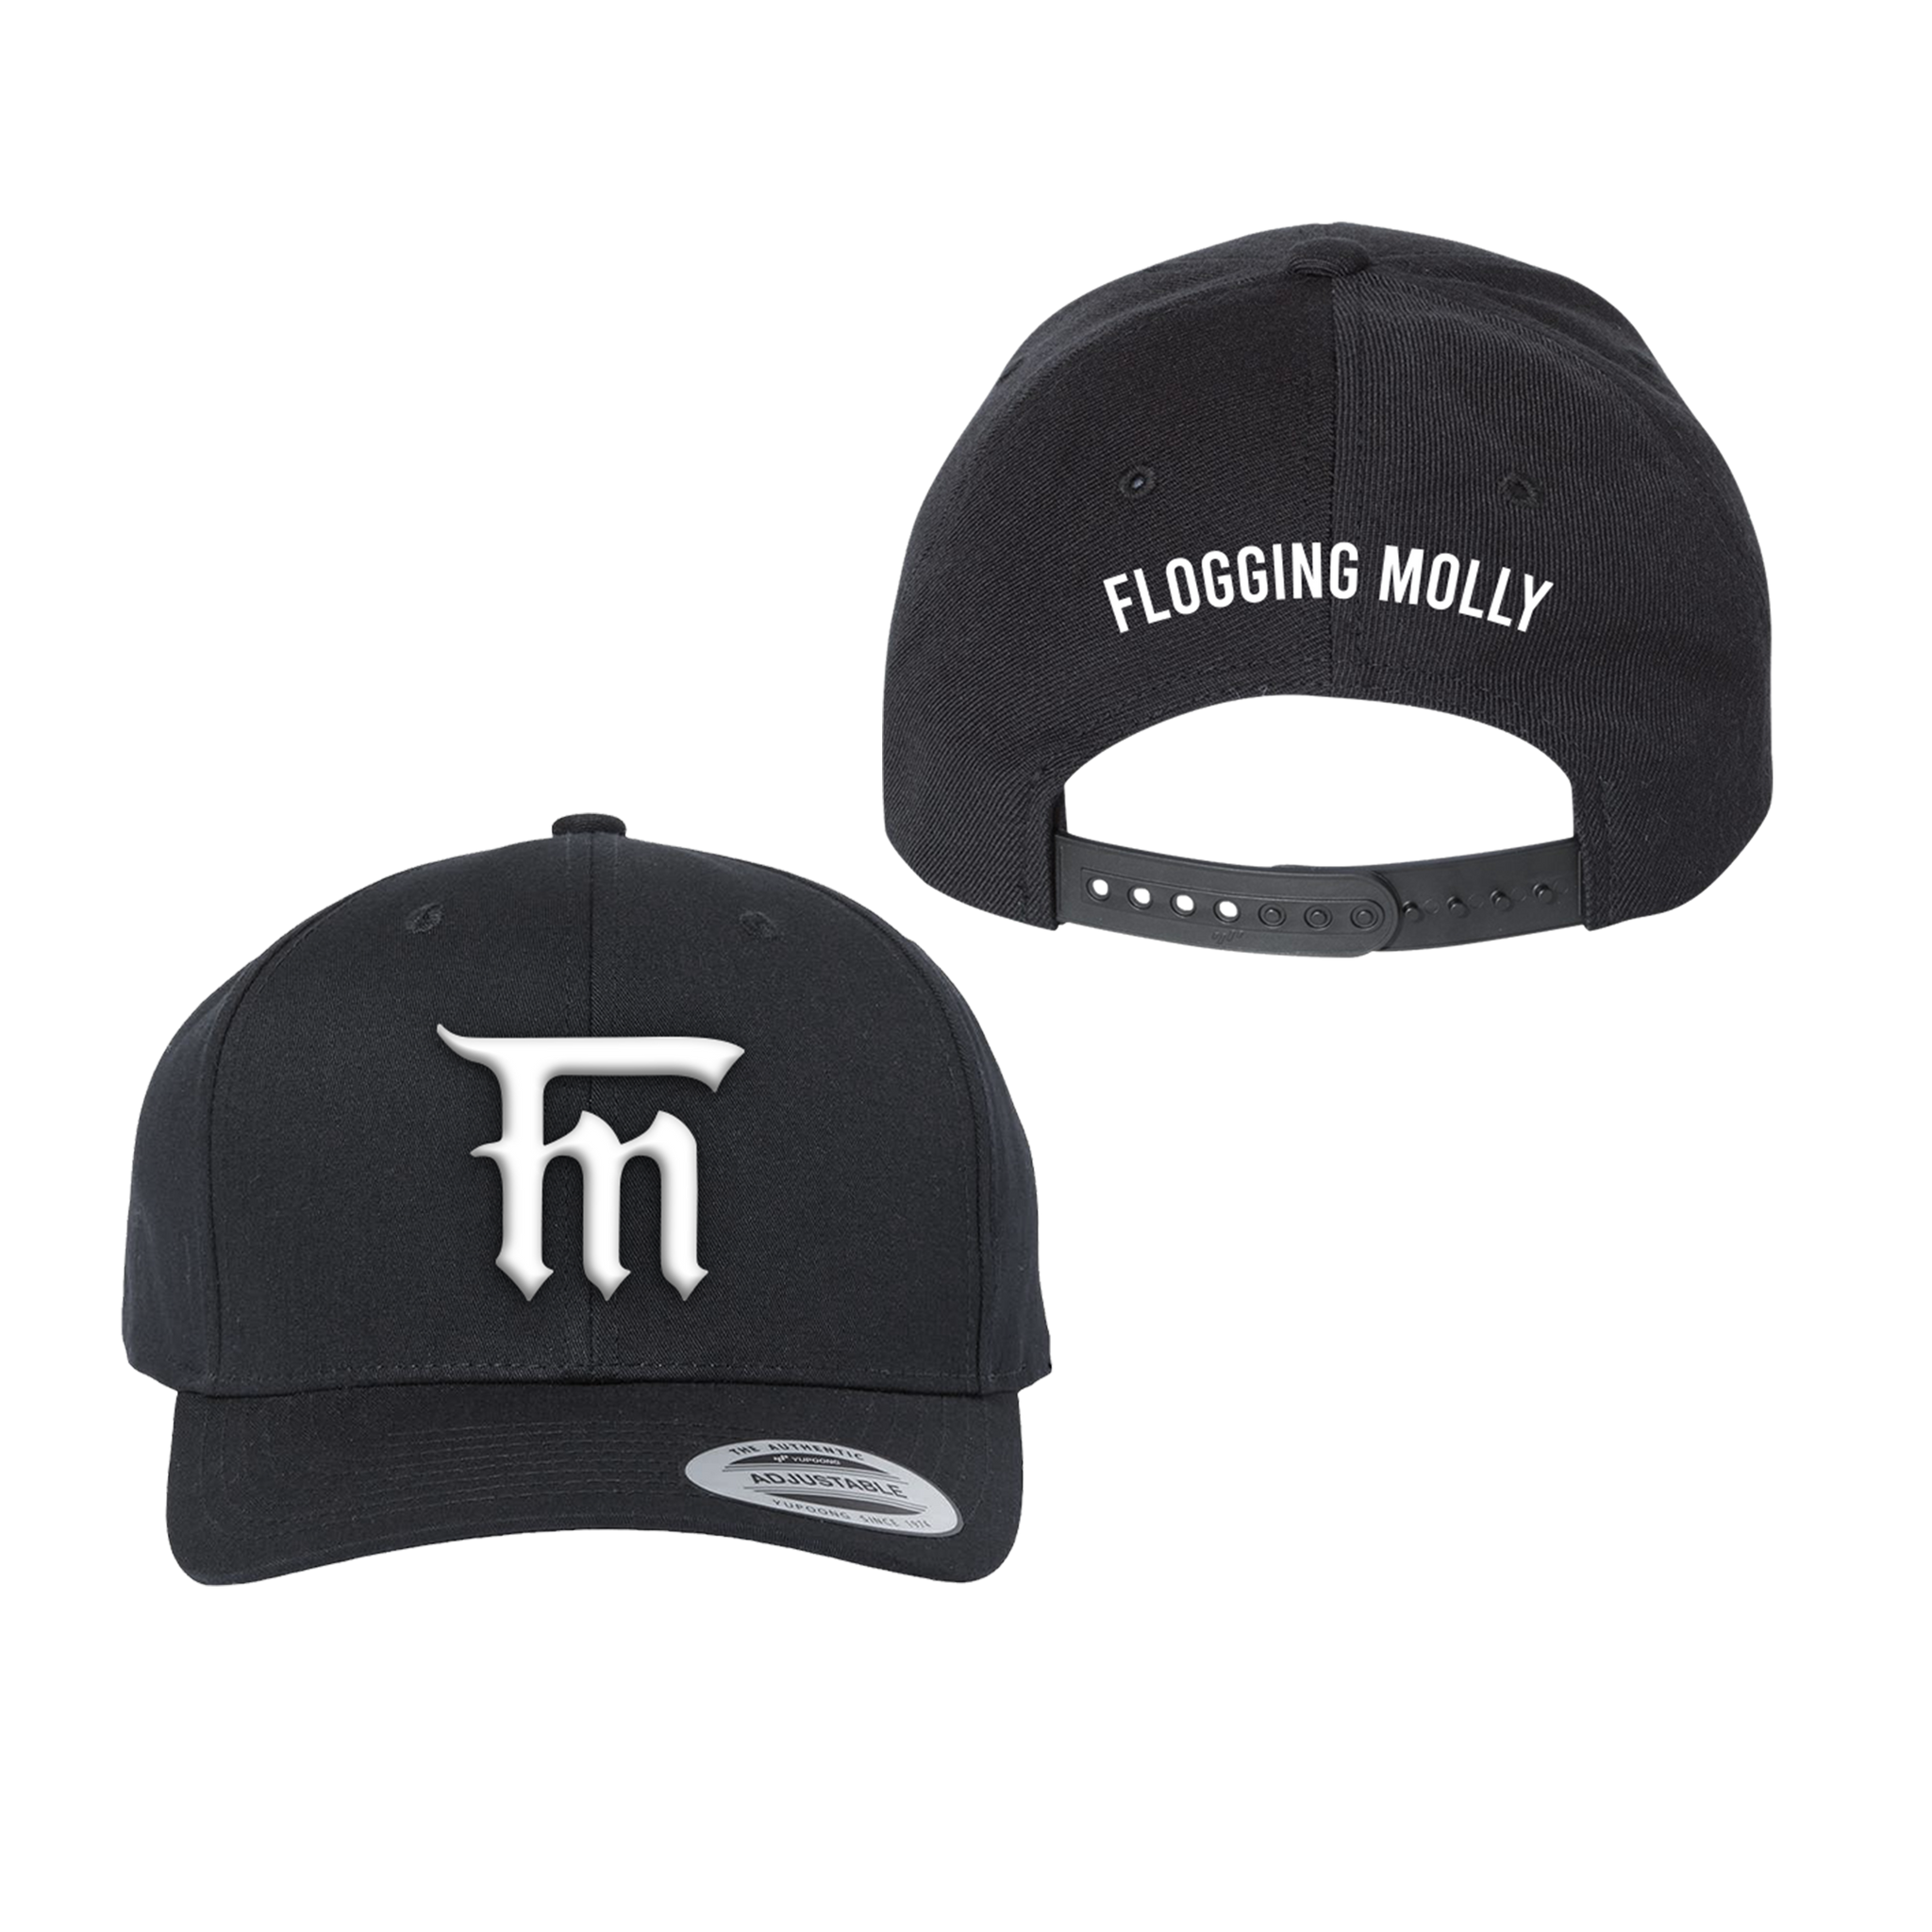 Snapback Hat with Puff embroidered logo – Flogging Molly